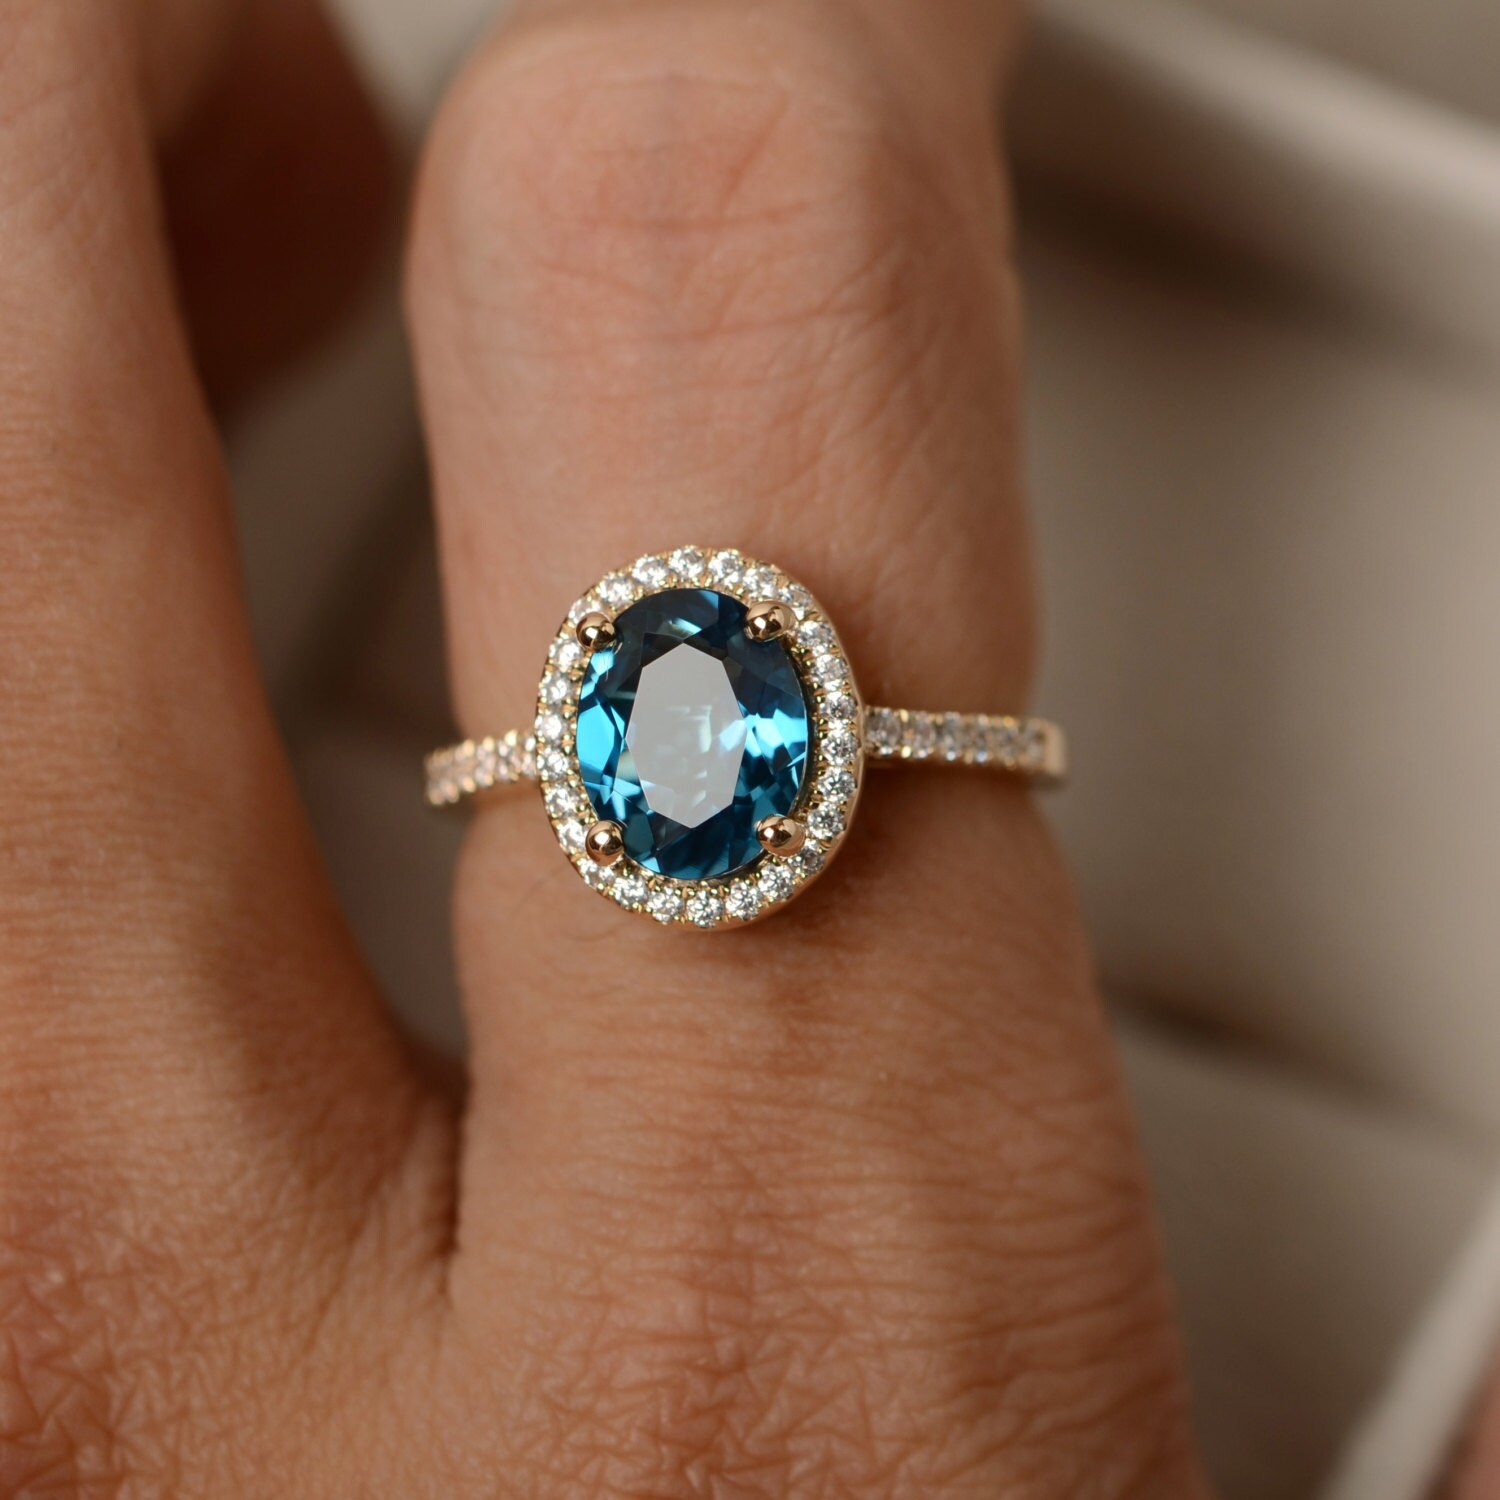 Details about   Adorable London Blue Topaz Oval Shape Gemstone 10k Yellow Gold Wedding Ring